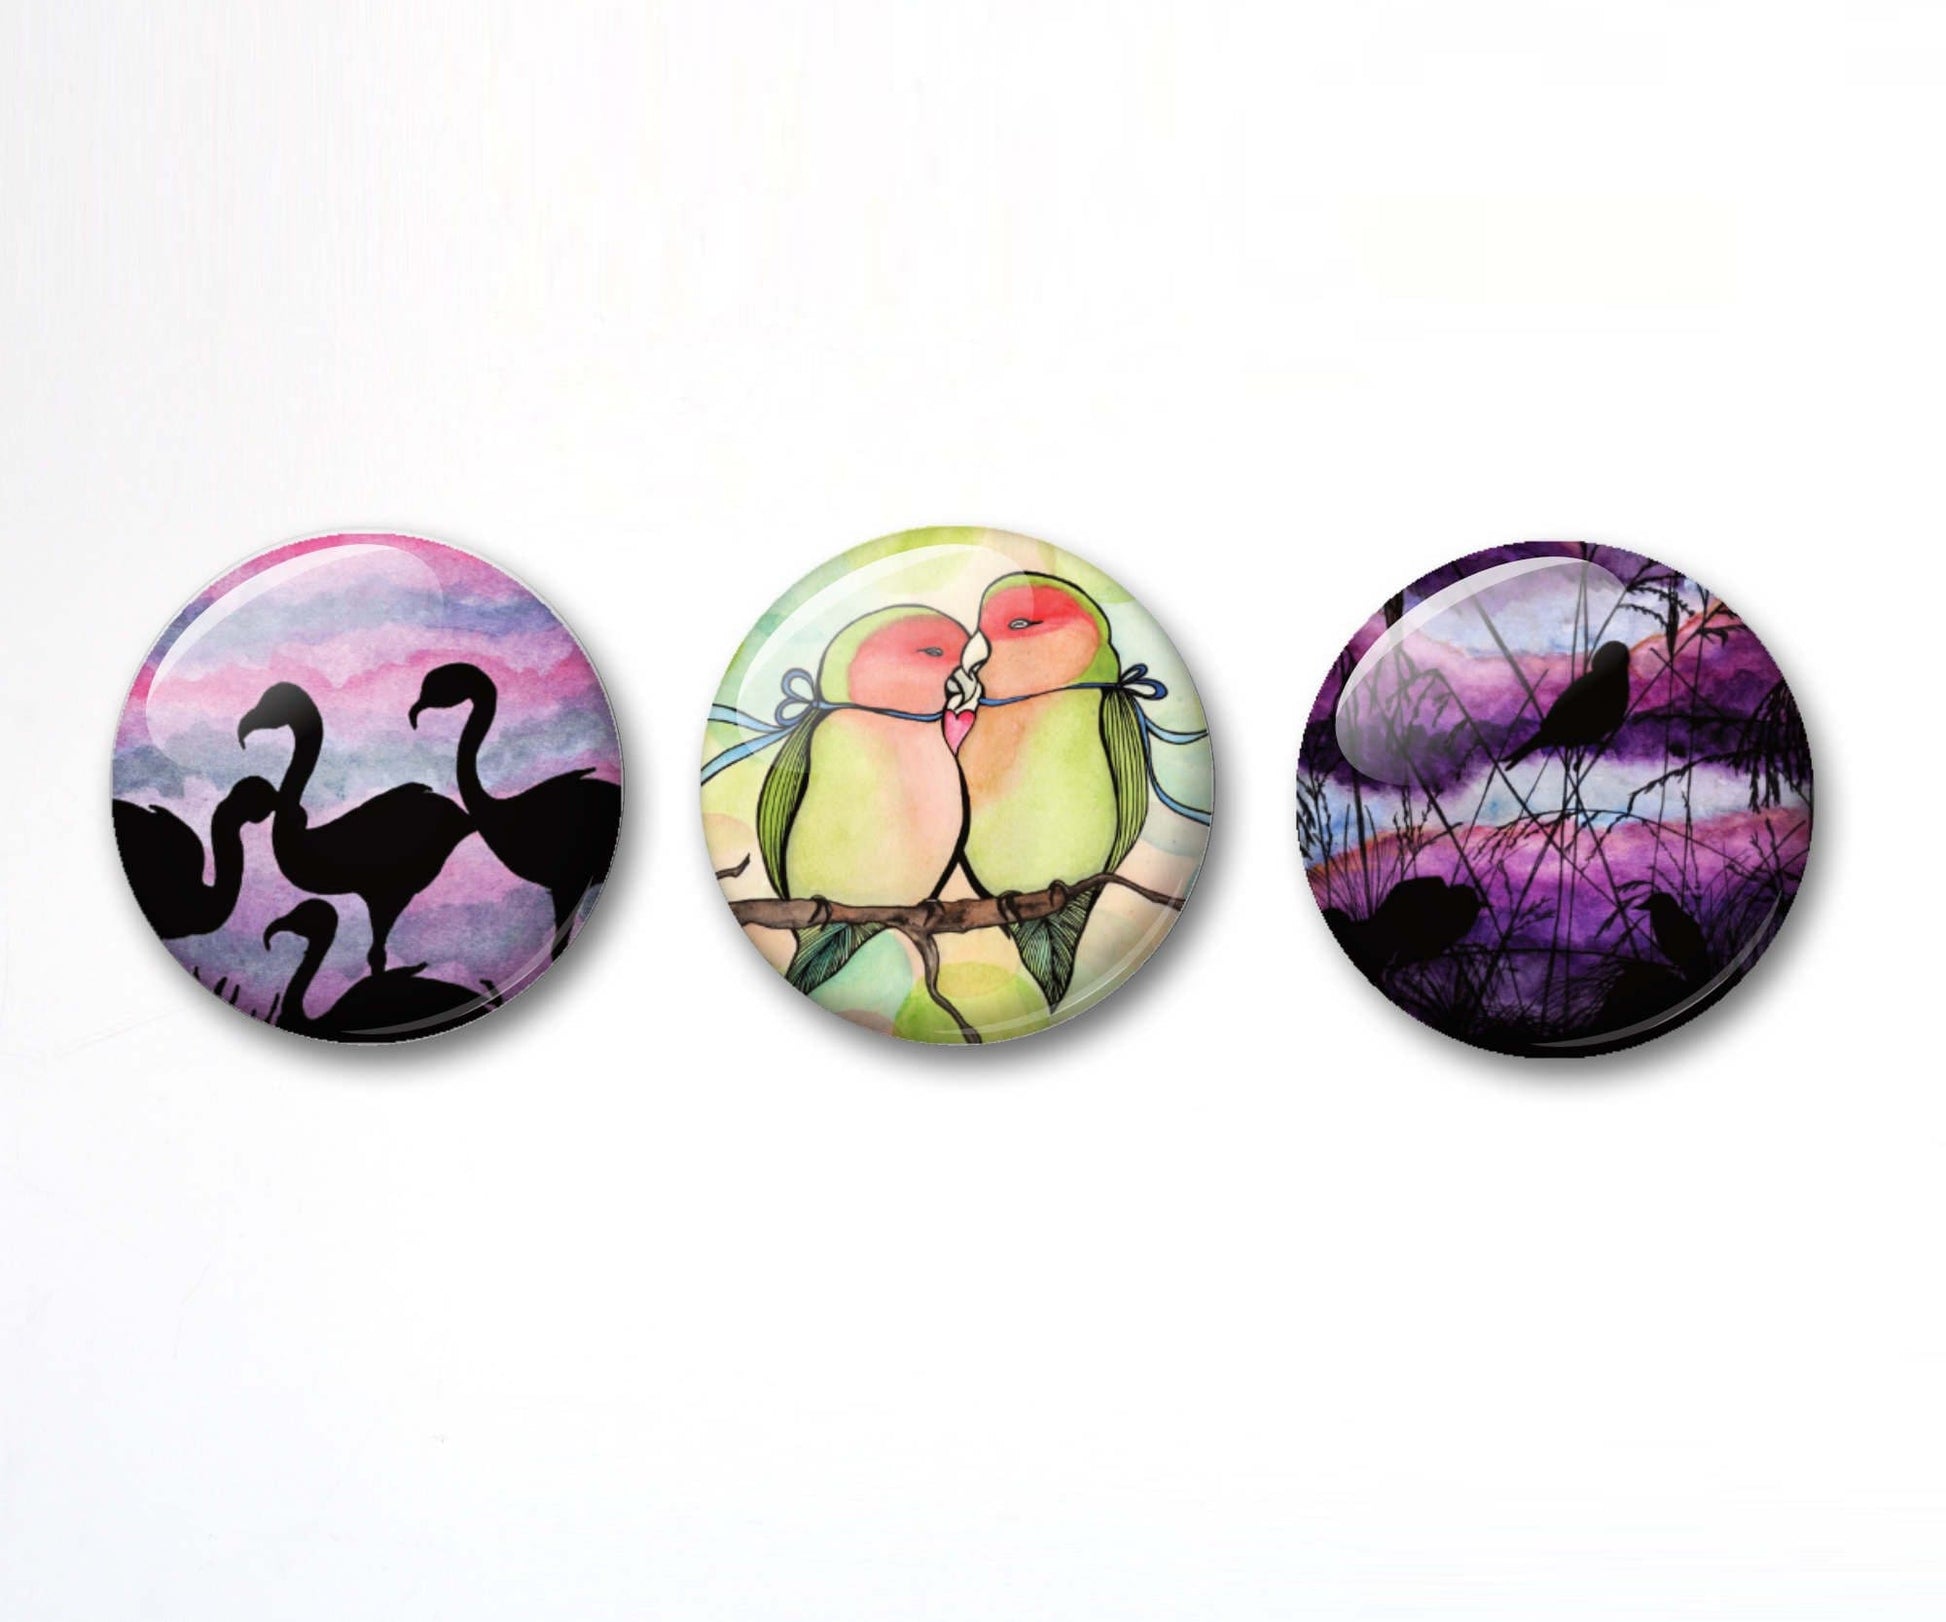 PinkPolish Design Buttons "Birds" Button Pack - 3-Pack Pin Back Button, 1 Inch